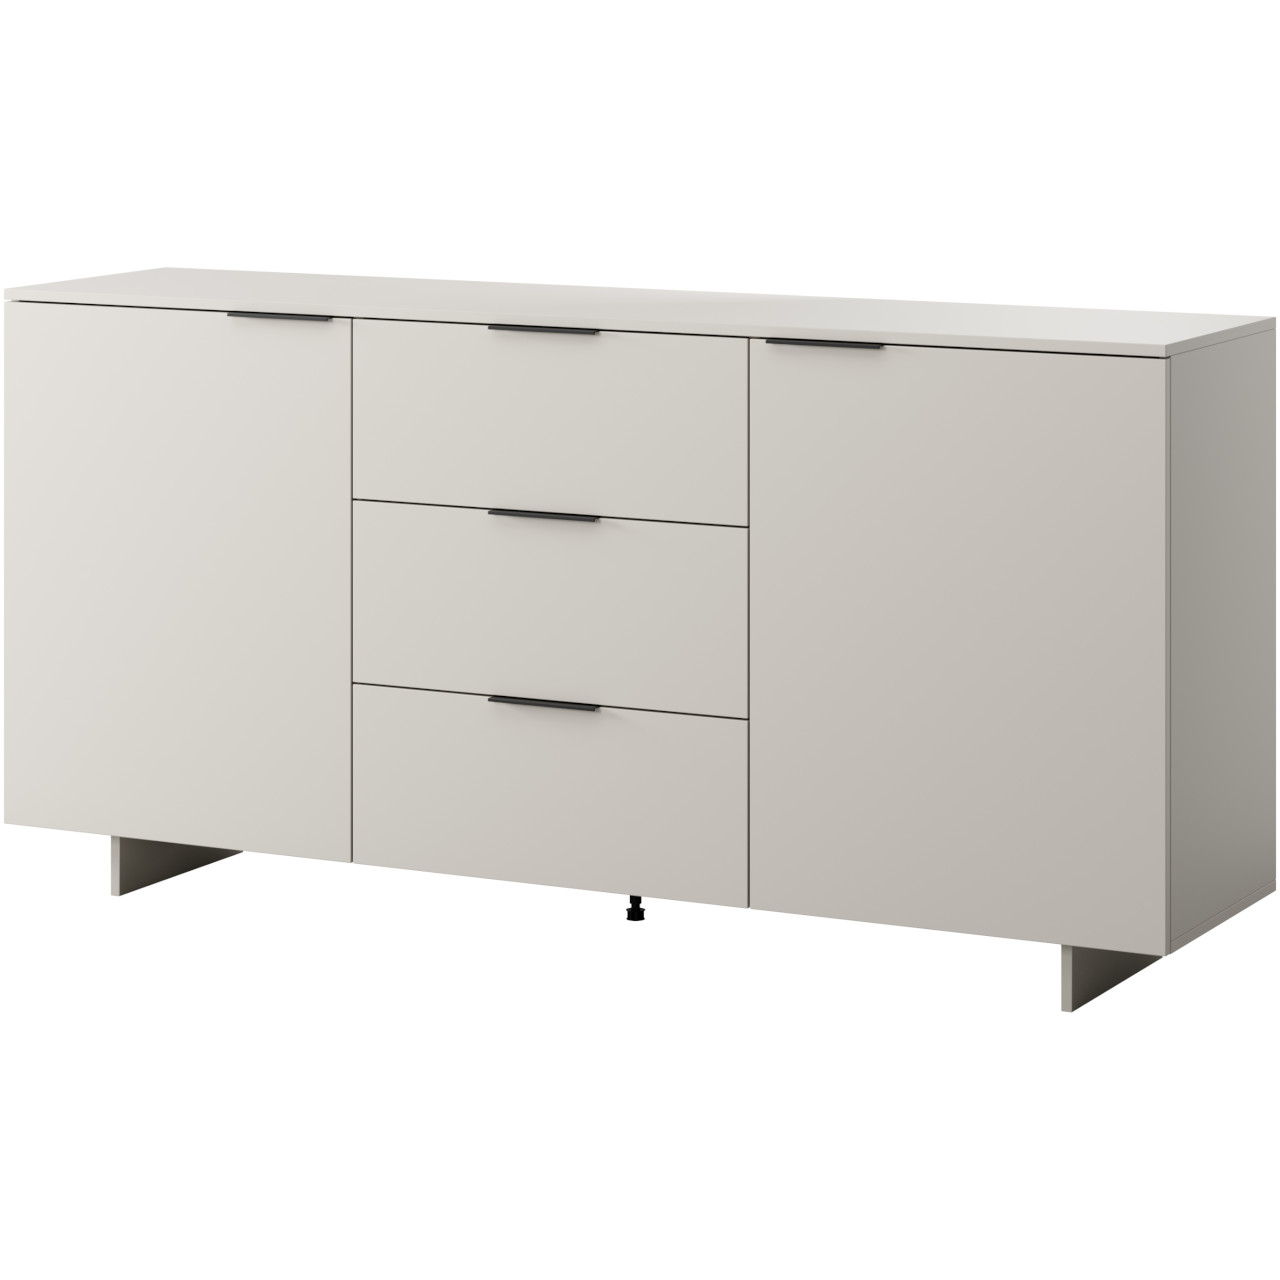 Chest of drawers MALMO 2D3S sand beige